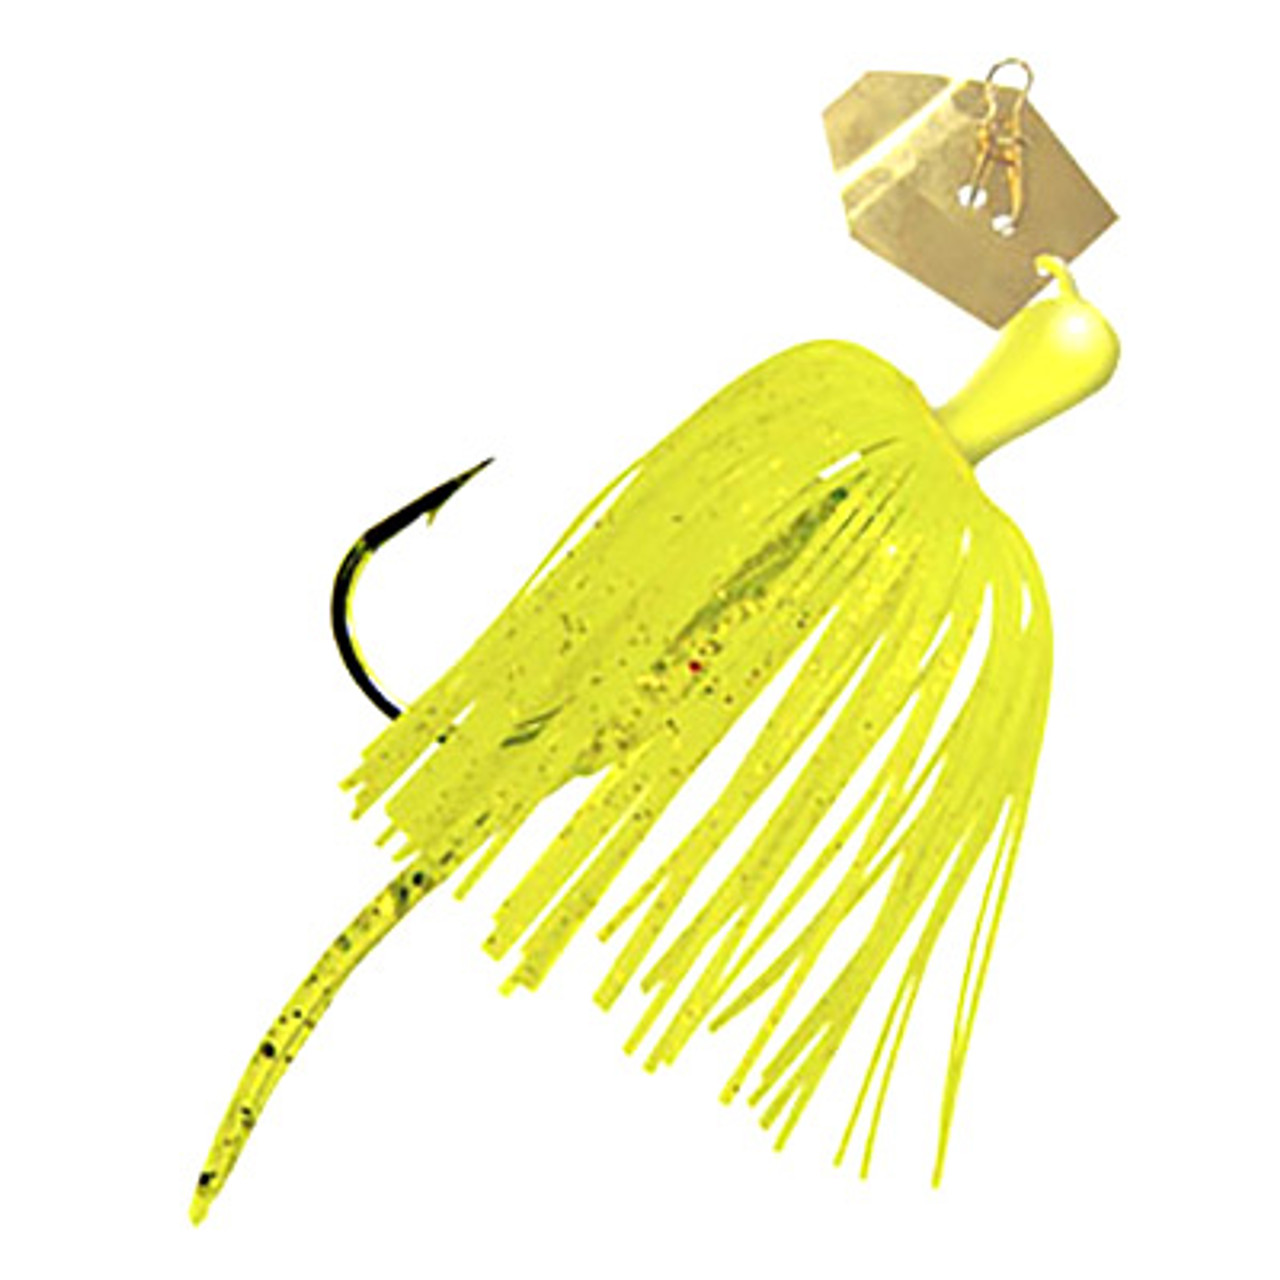 Chatterbait Micro 1/8 oz Bladed Jigs by Z-Man